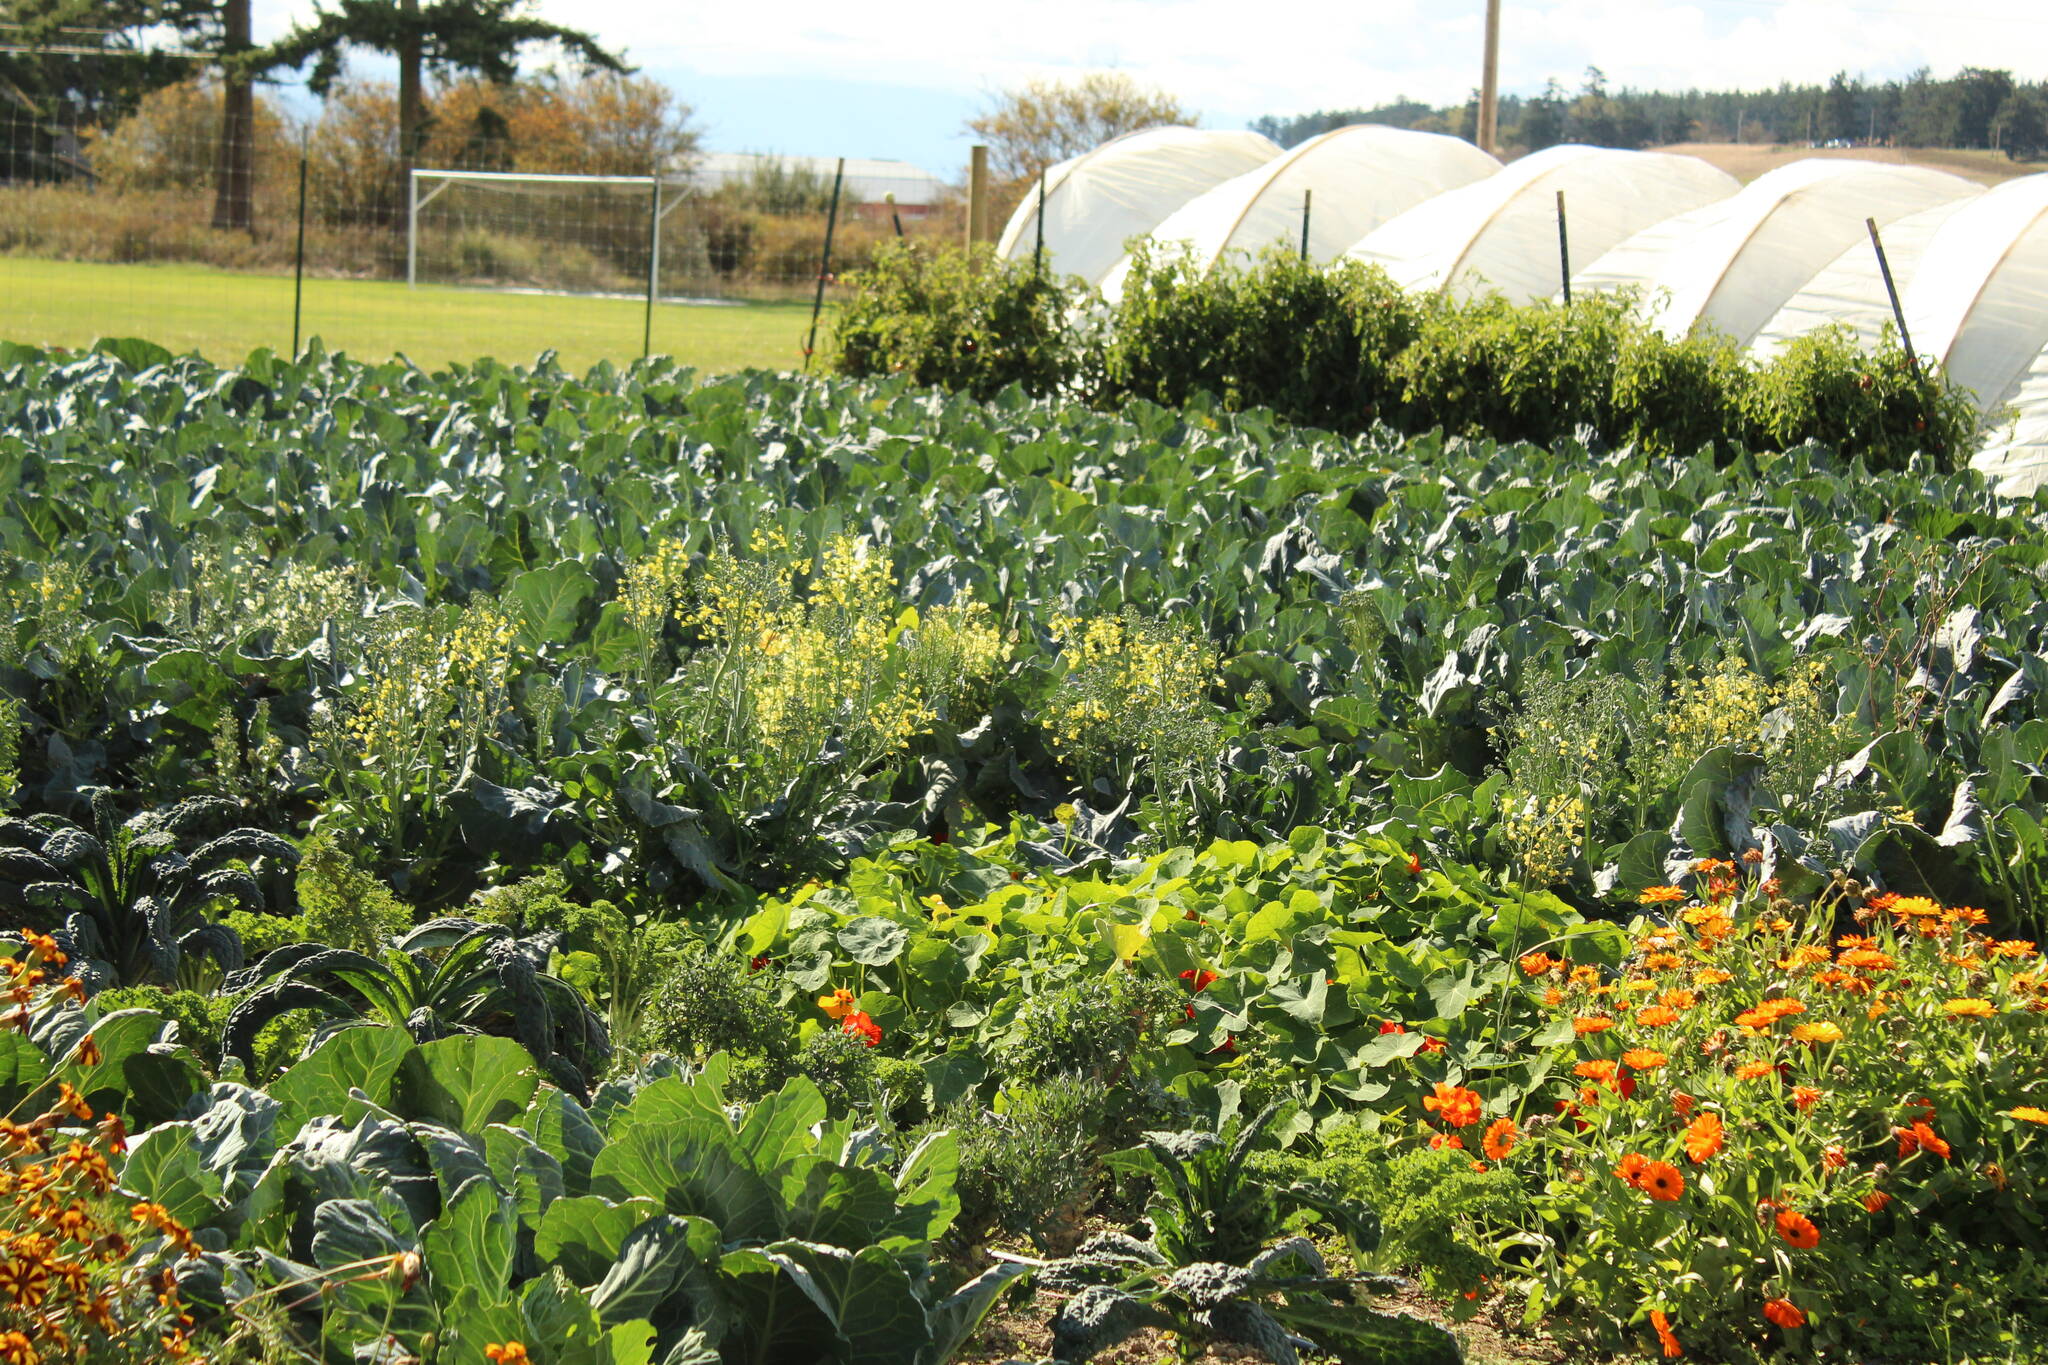 The Coupeville school farm produces fresh vegetables and legumes for district students.